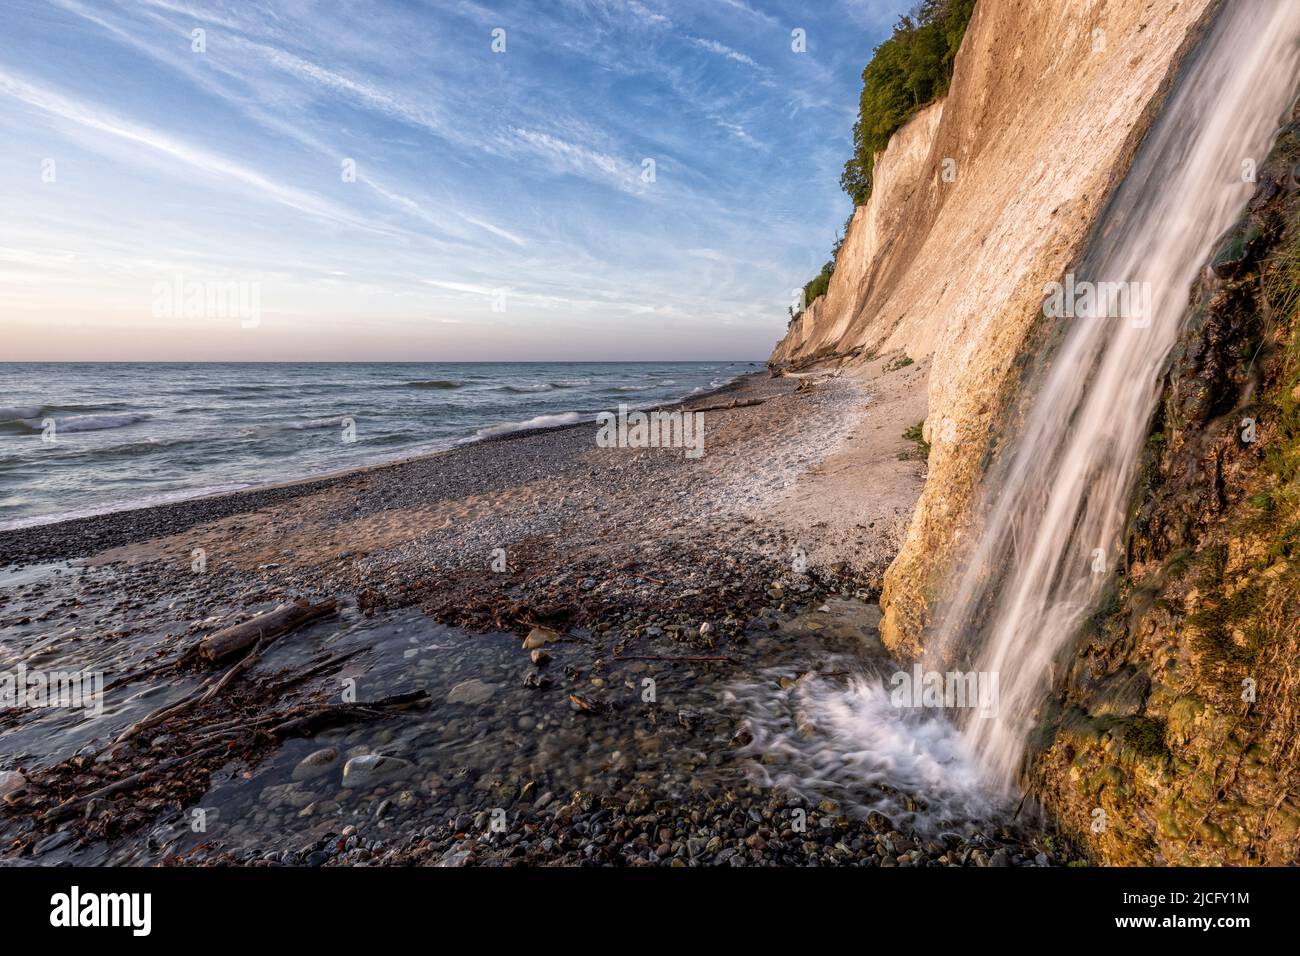 Waterfall of the 'Kieler Bach' on the Kieler shore of the chalk coast on the island of Rügen in the Jasmund National Park Stock Photo